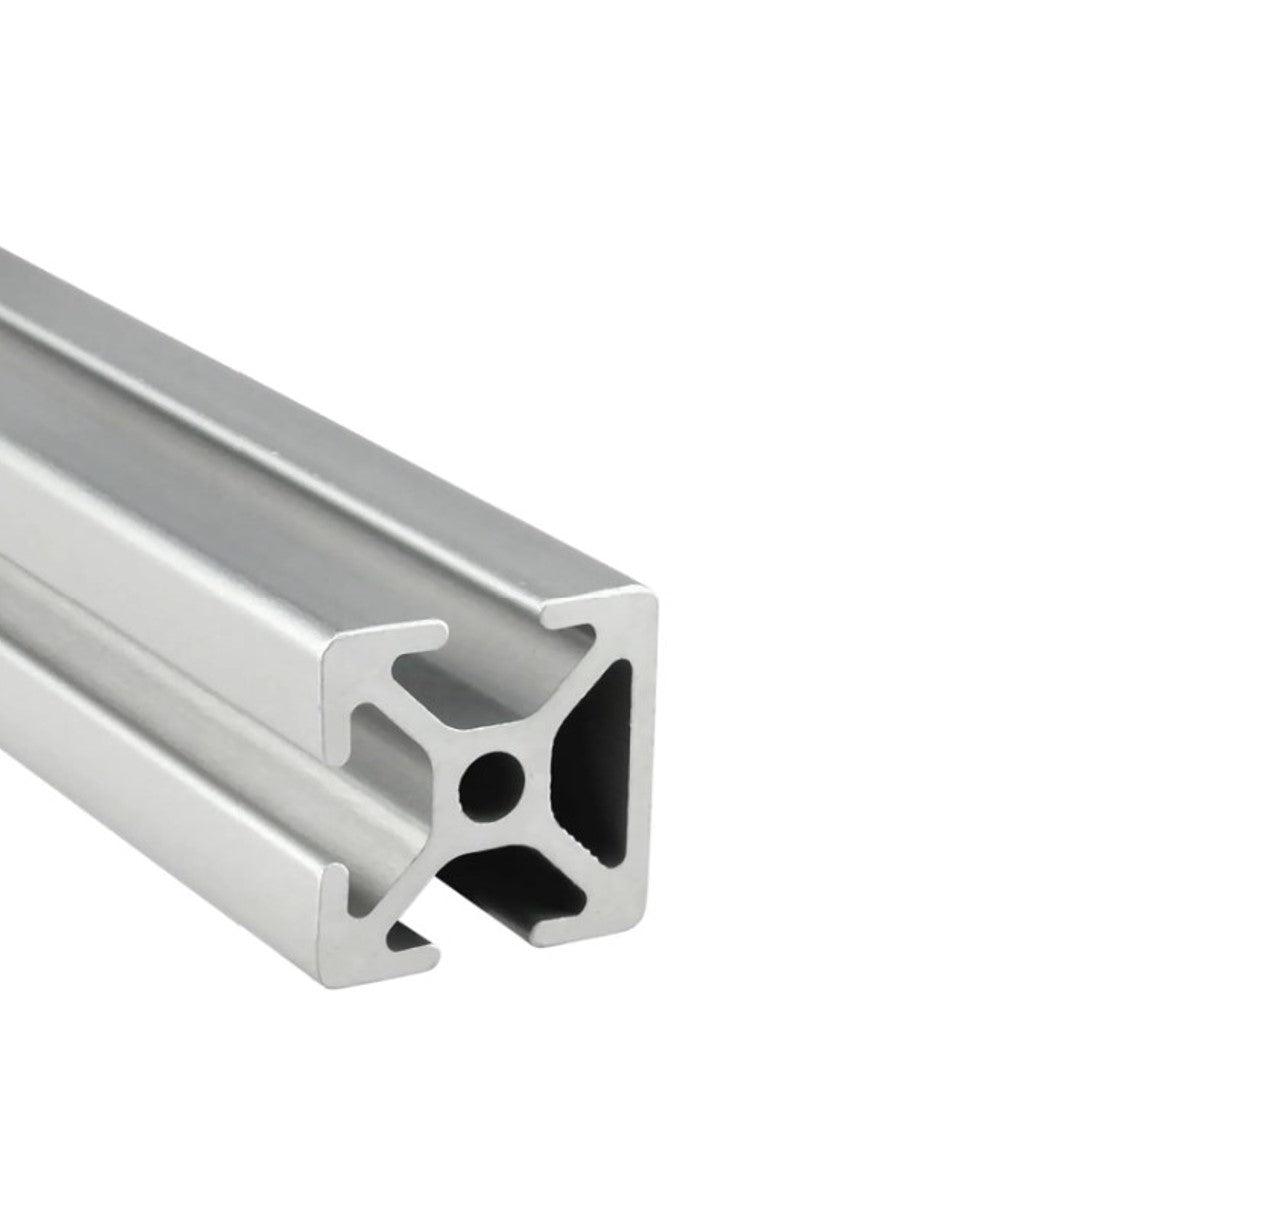 1" x 1" Smooth Tri-Slotted Aluminum Extrusion - 3ft Bar - Forces Inc